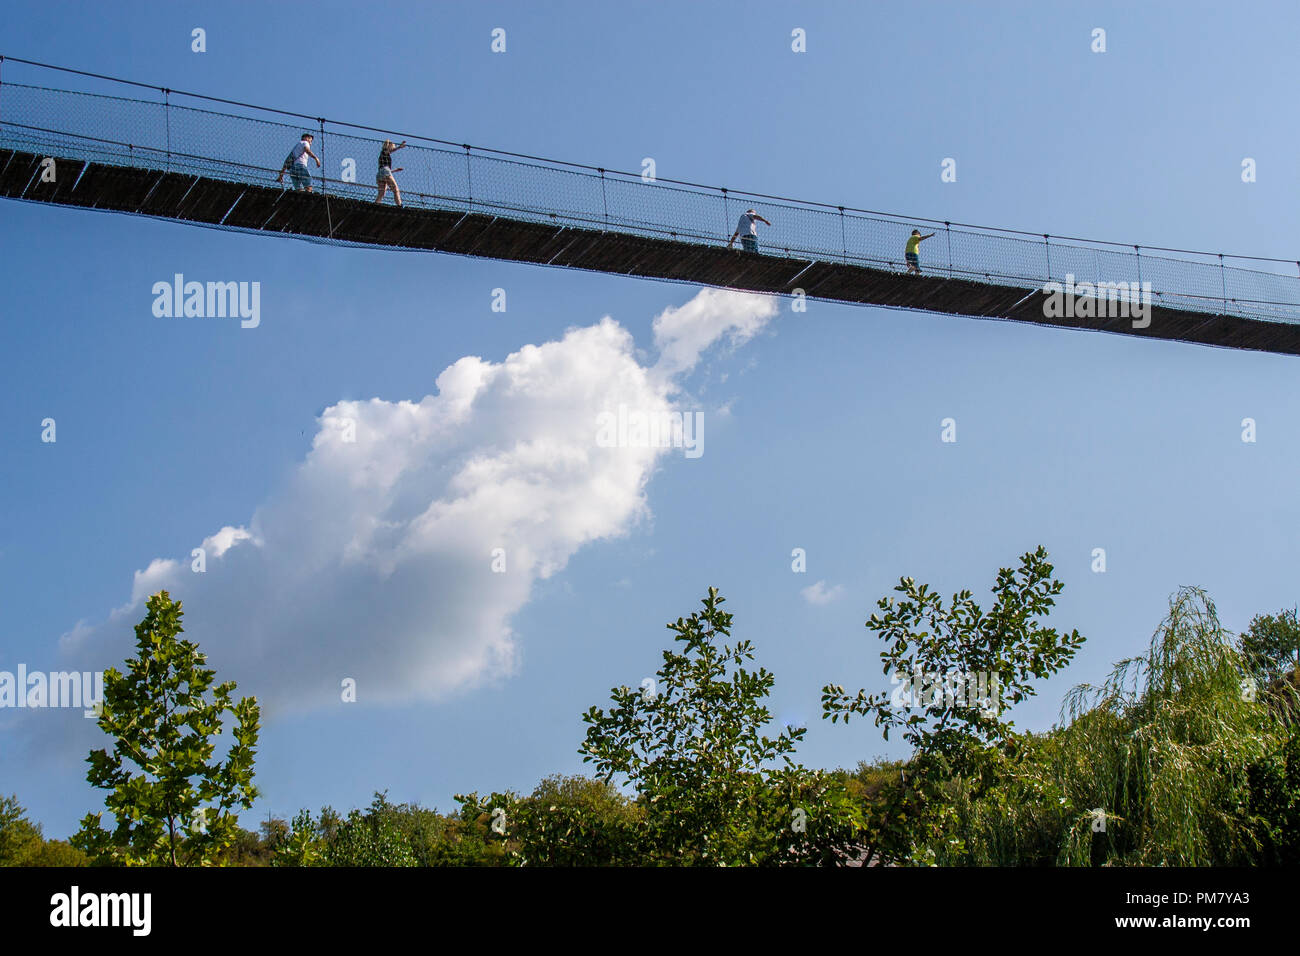 People walking on the suspension bridge over the trees in high height Stock Photo